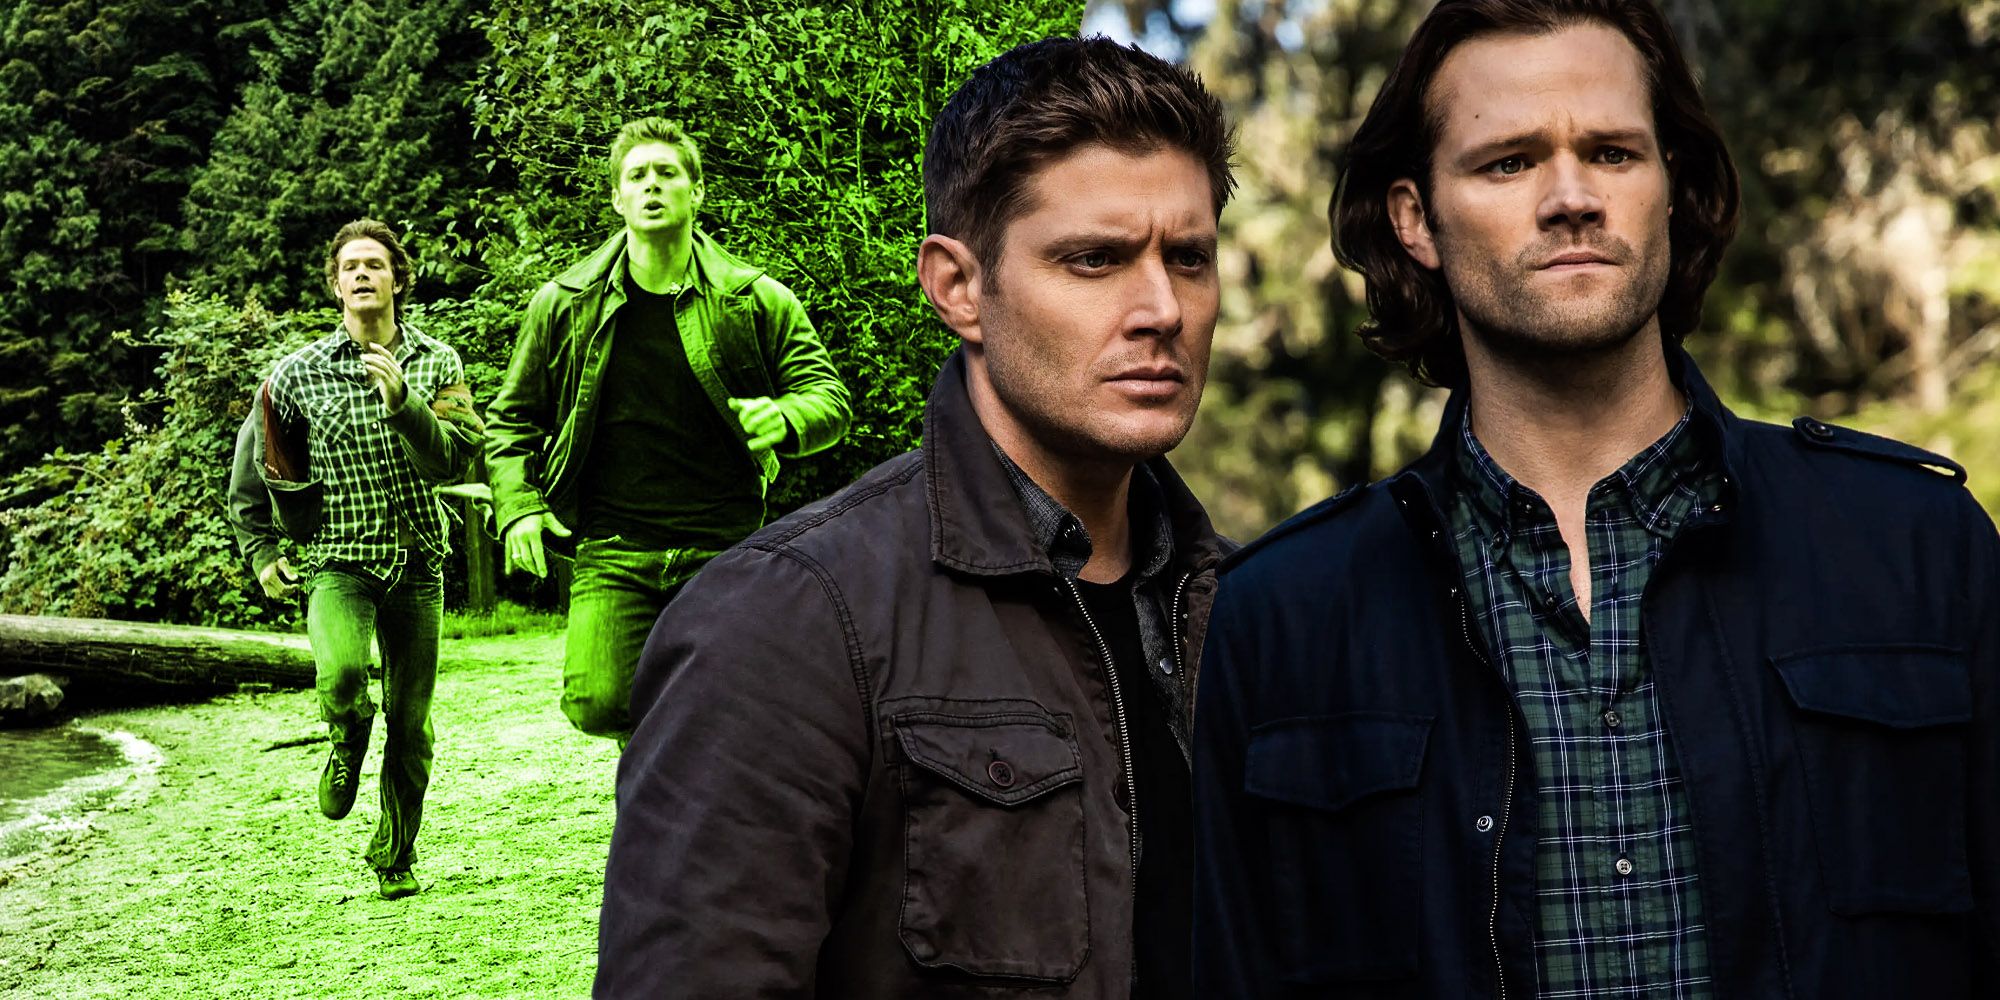 Supernaturals Original Plan Didnt Feature The Winchester Bros (Why It Changed)